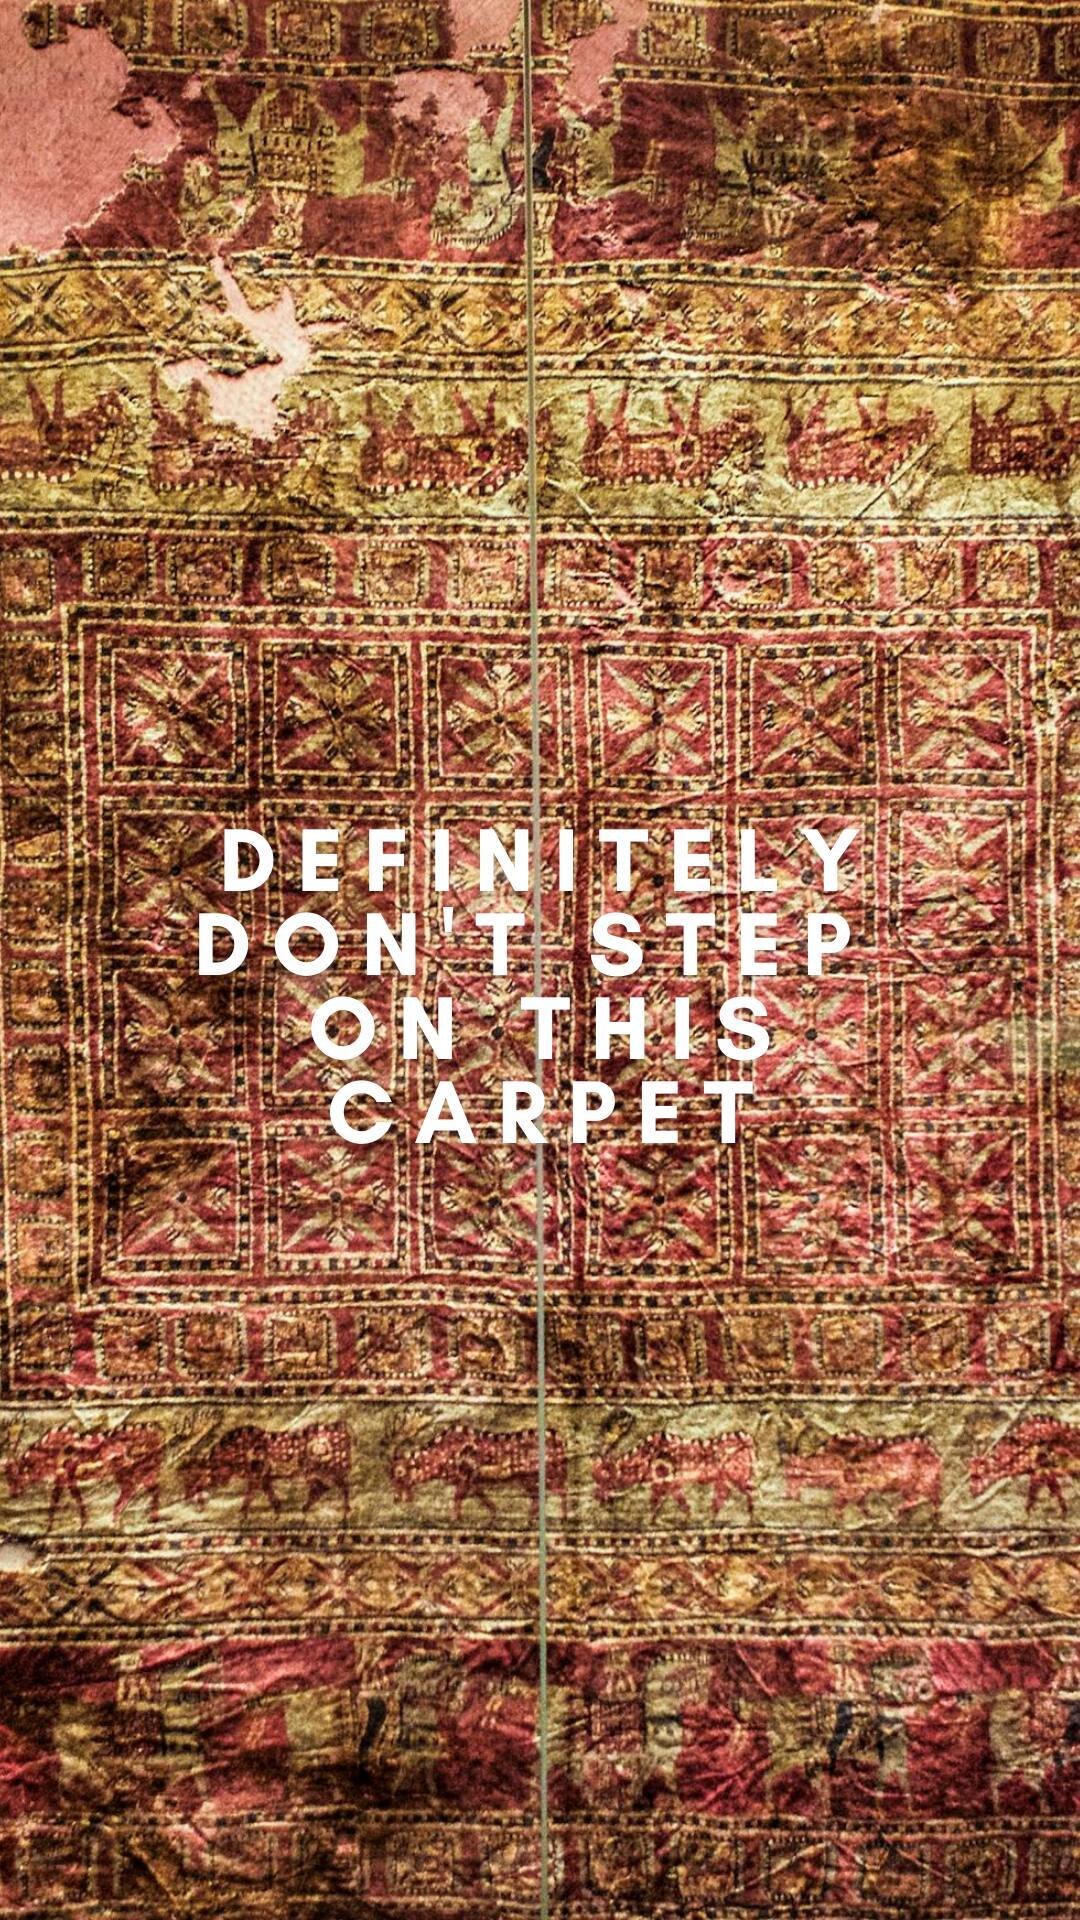 Bet you&rsquo;d never learn about the history of carpets &ndash; get ready for this:

The oldest surviving carpet was excavated in 1949 from a Pazyryk burial mound in the Altai Mountains in Siberia. It dates back all the way to the 4th or 5th century